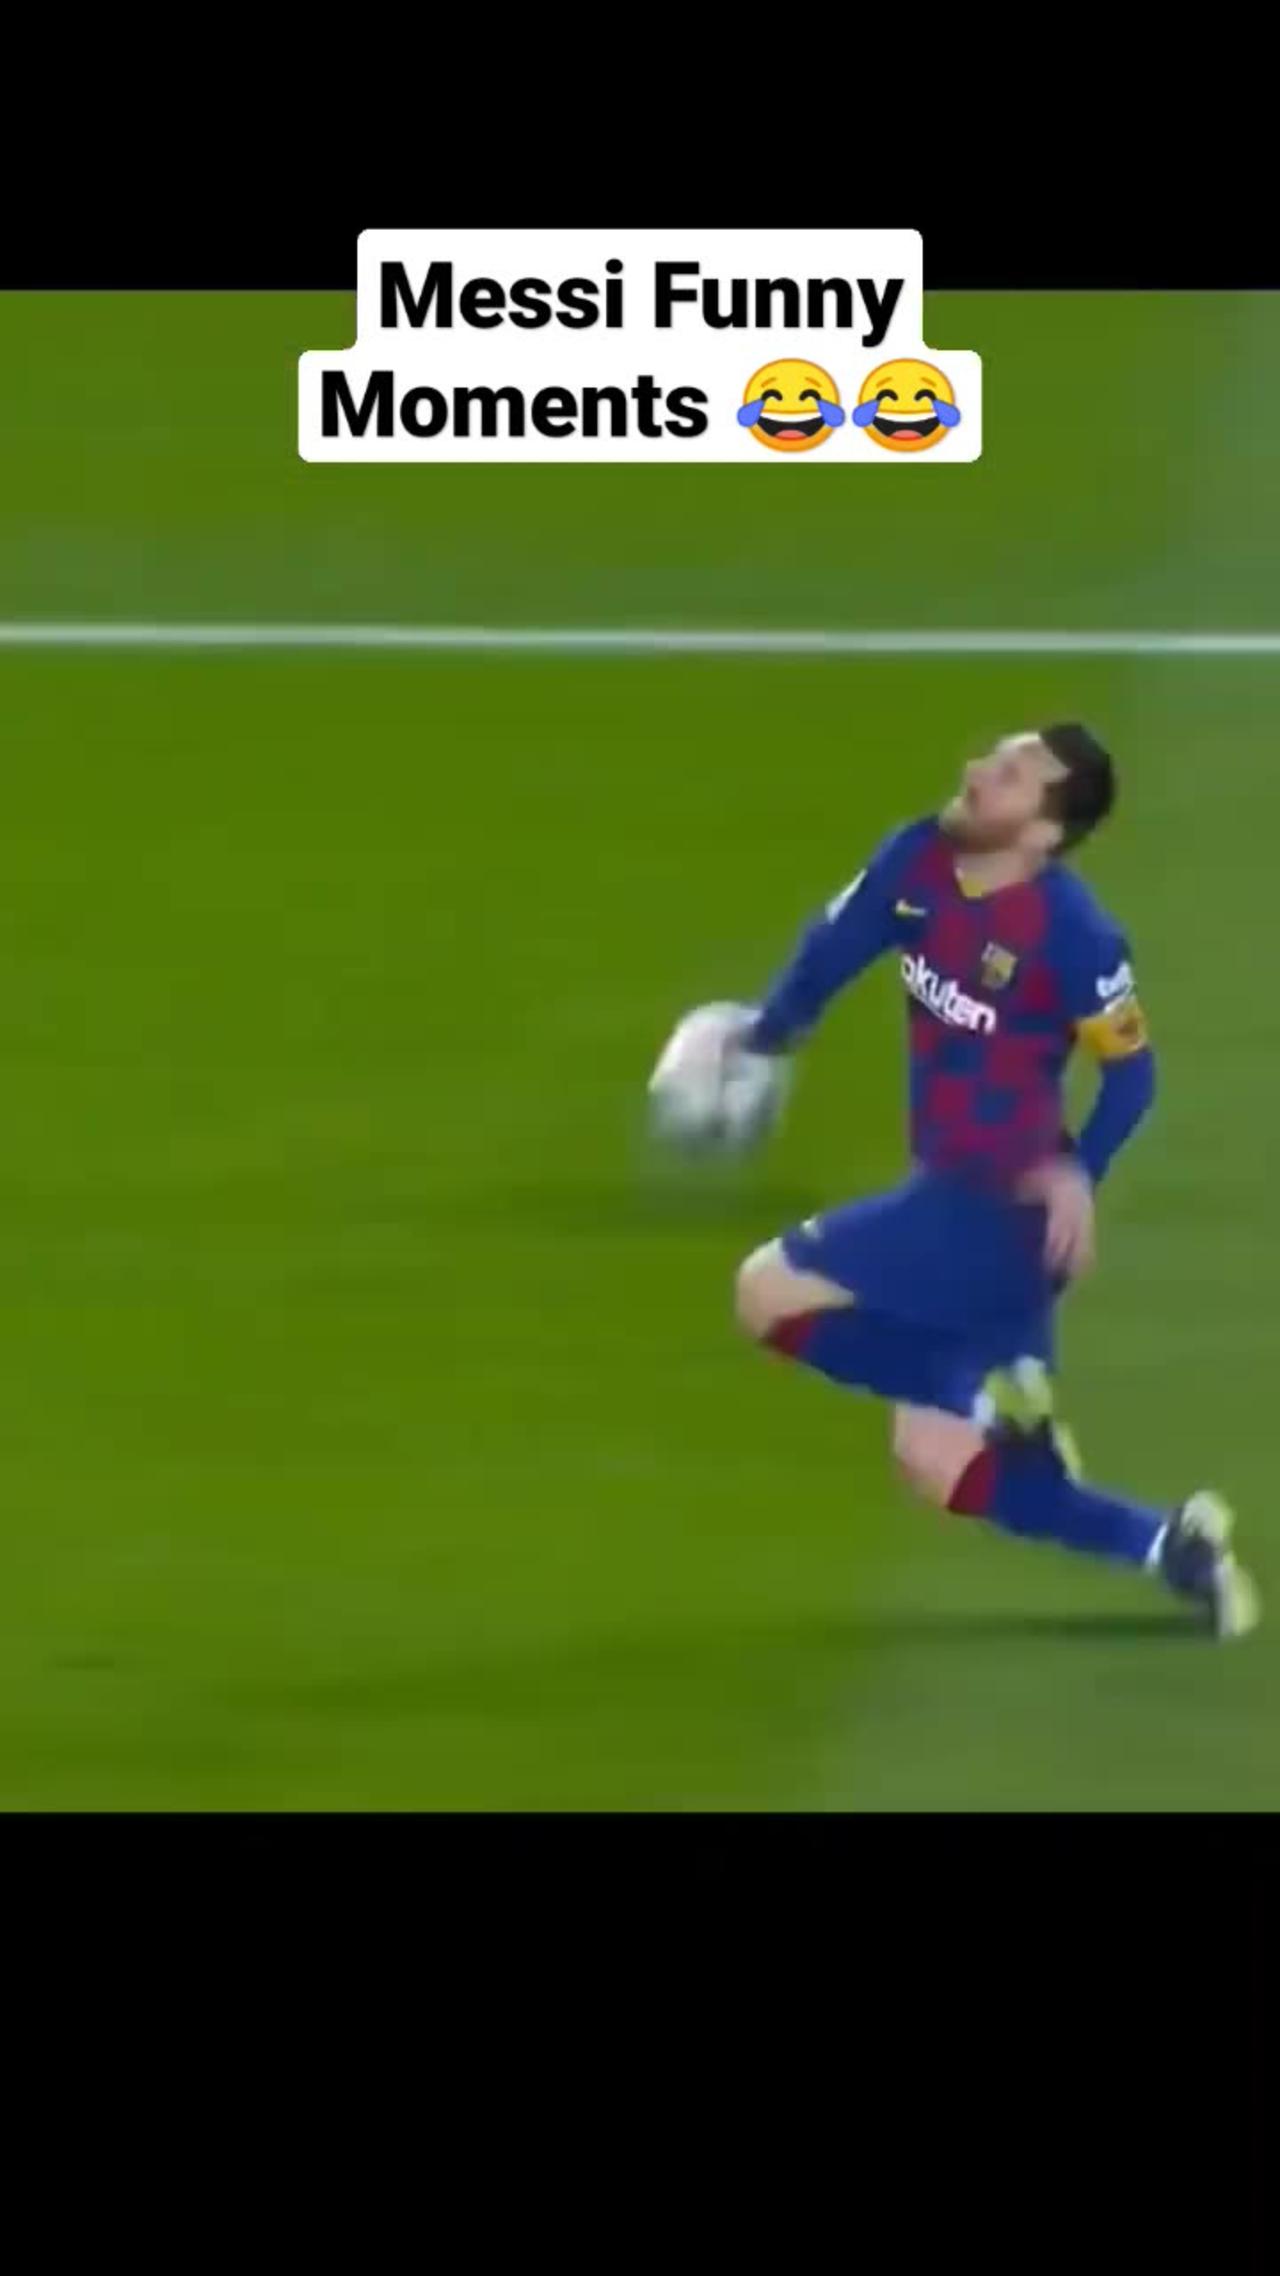 Lionel Messi Funniest moments